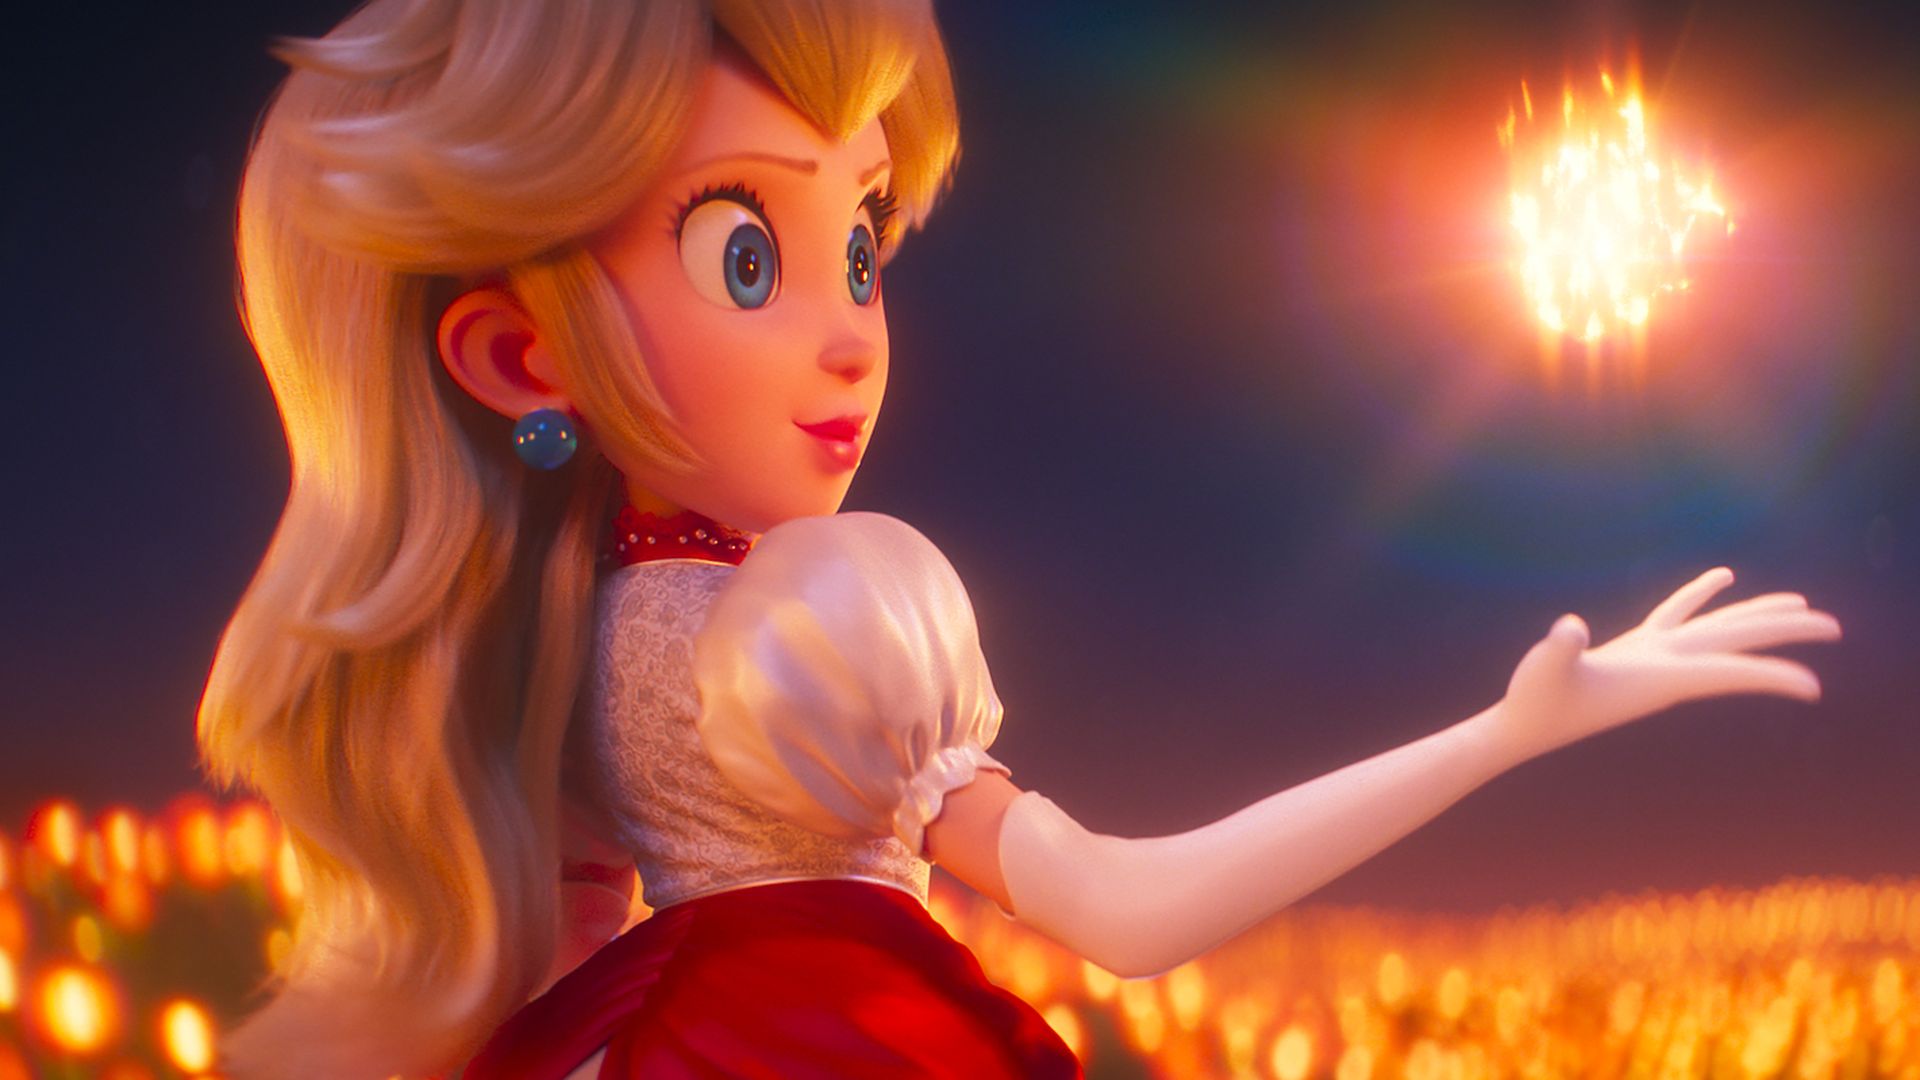 Animated still showing Princess Peach tossing a fireball in the air